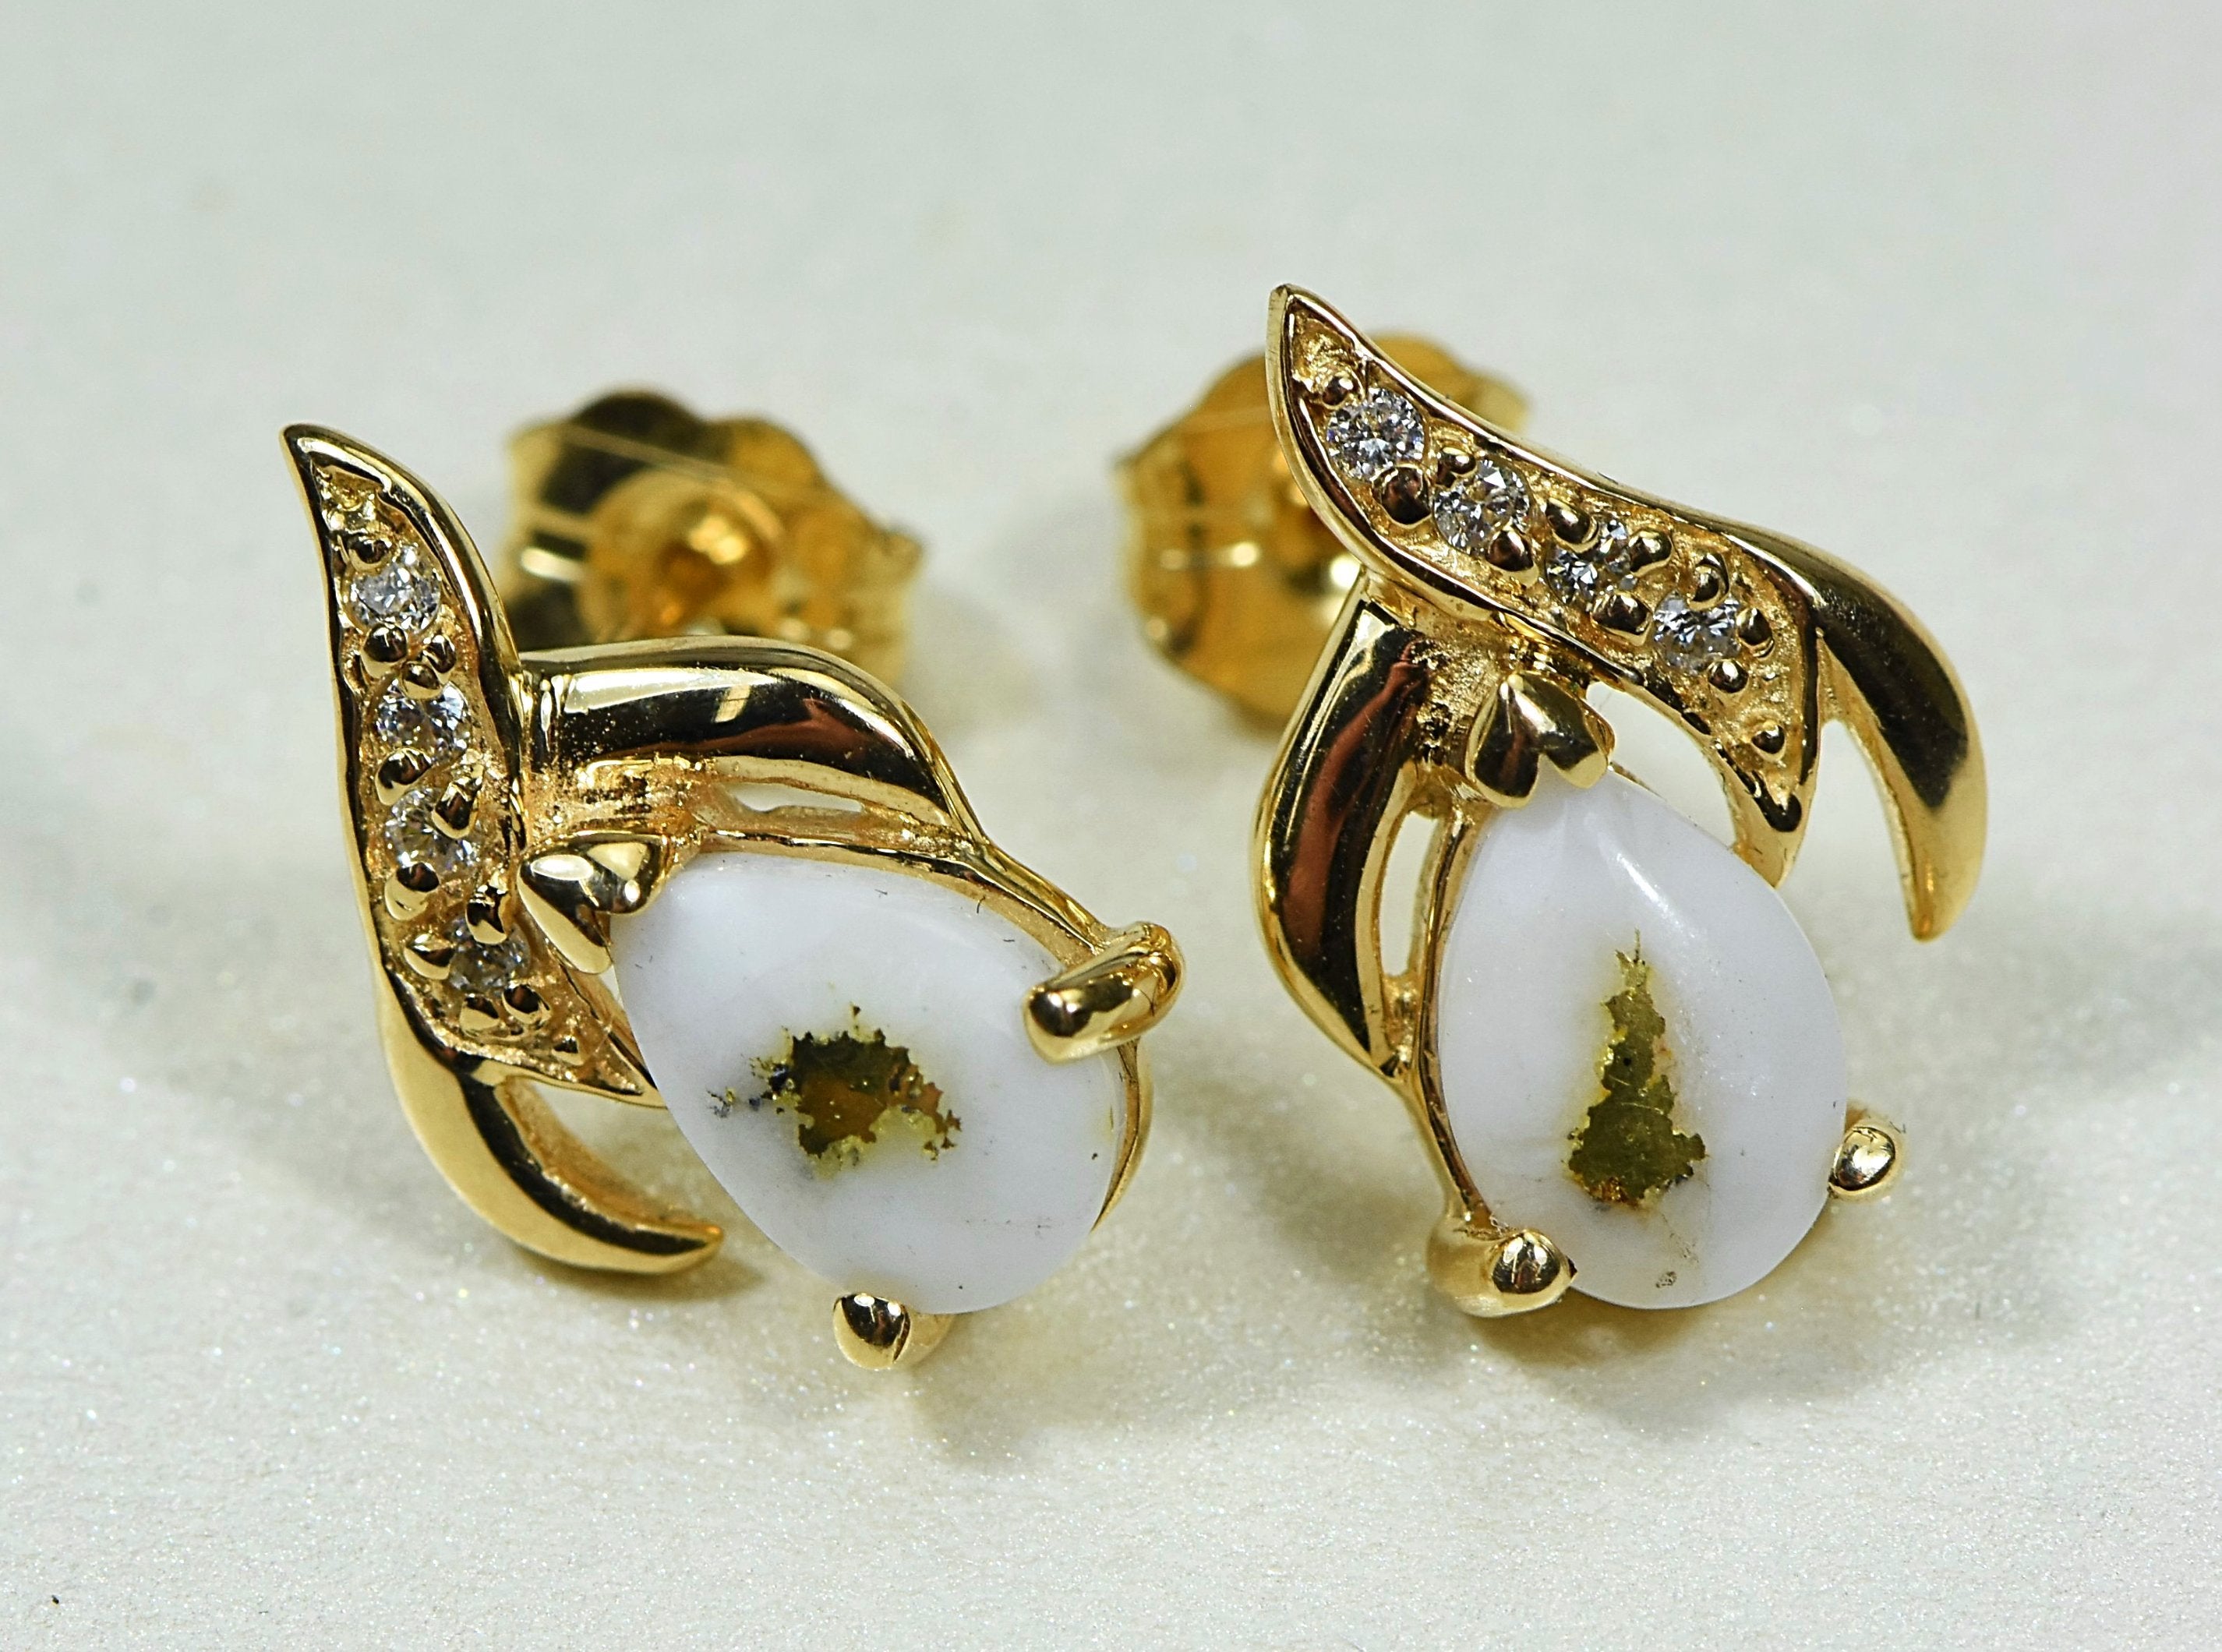 Gold Quartz Earrings "Orocal" EN792SDQ Genuine Hand Crafted Jewelry - 14K Gold Casting